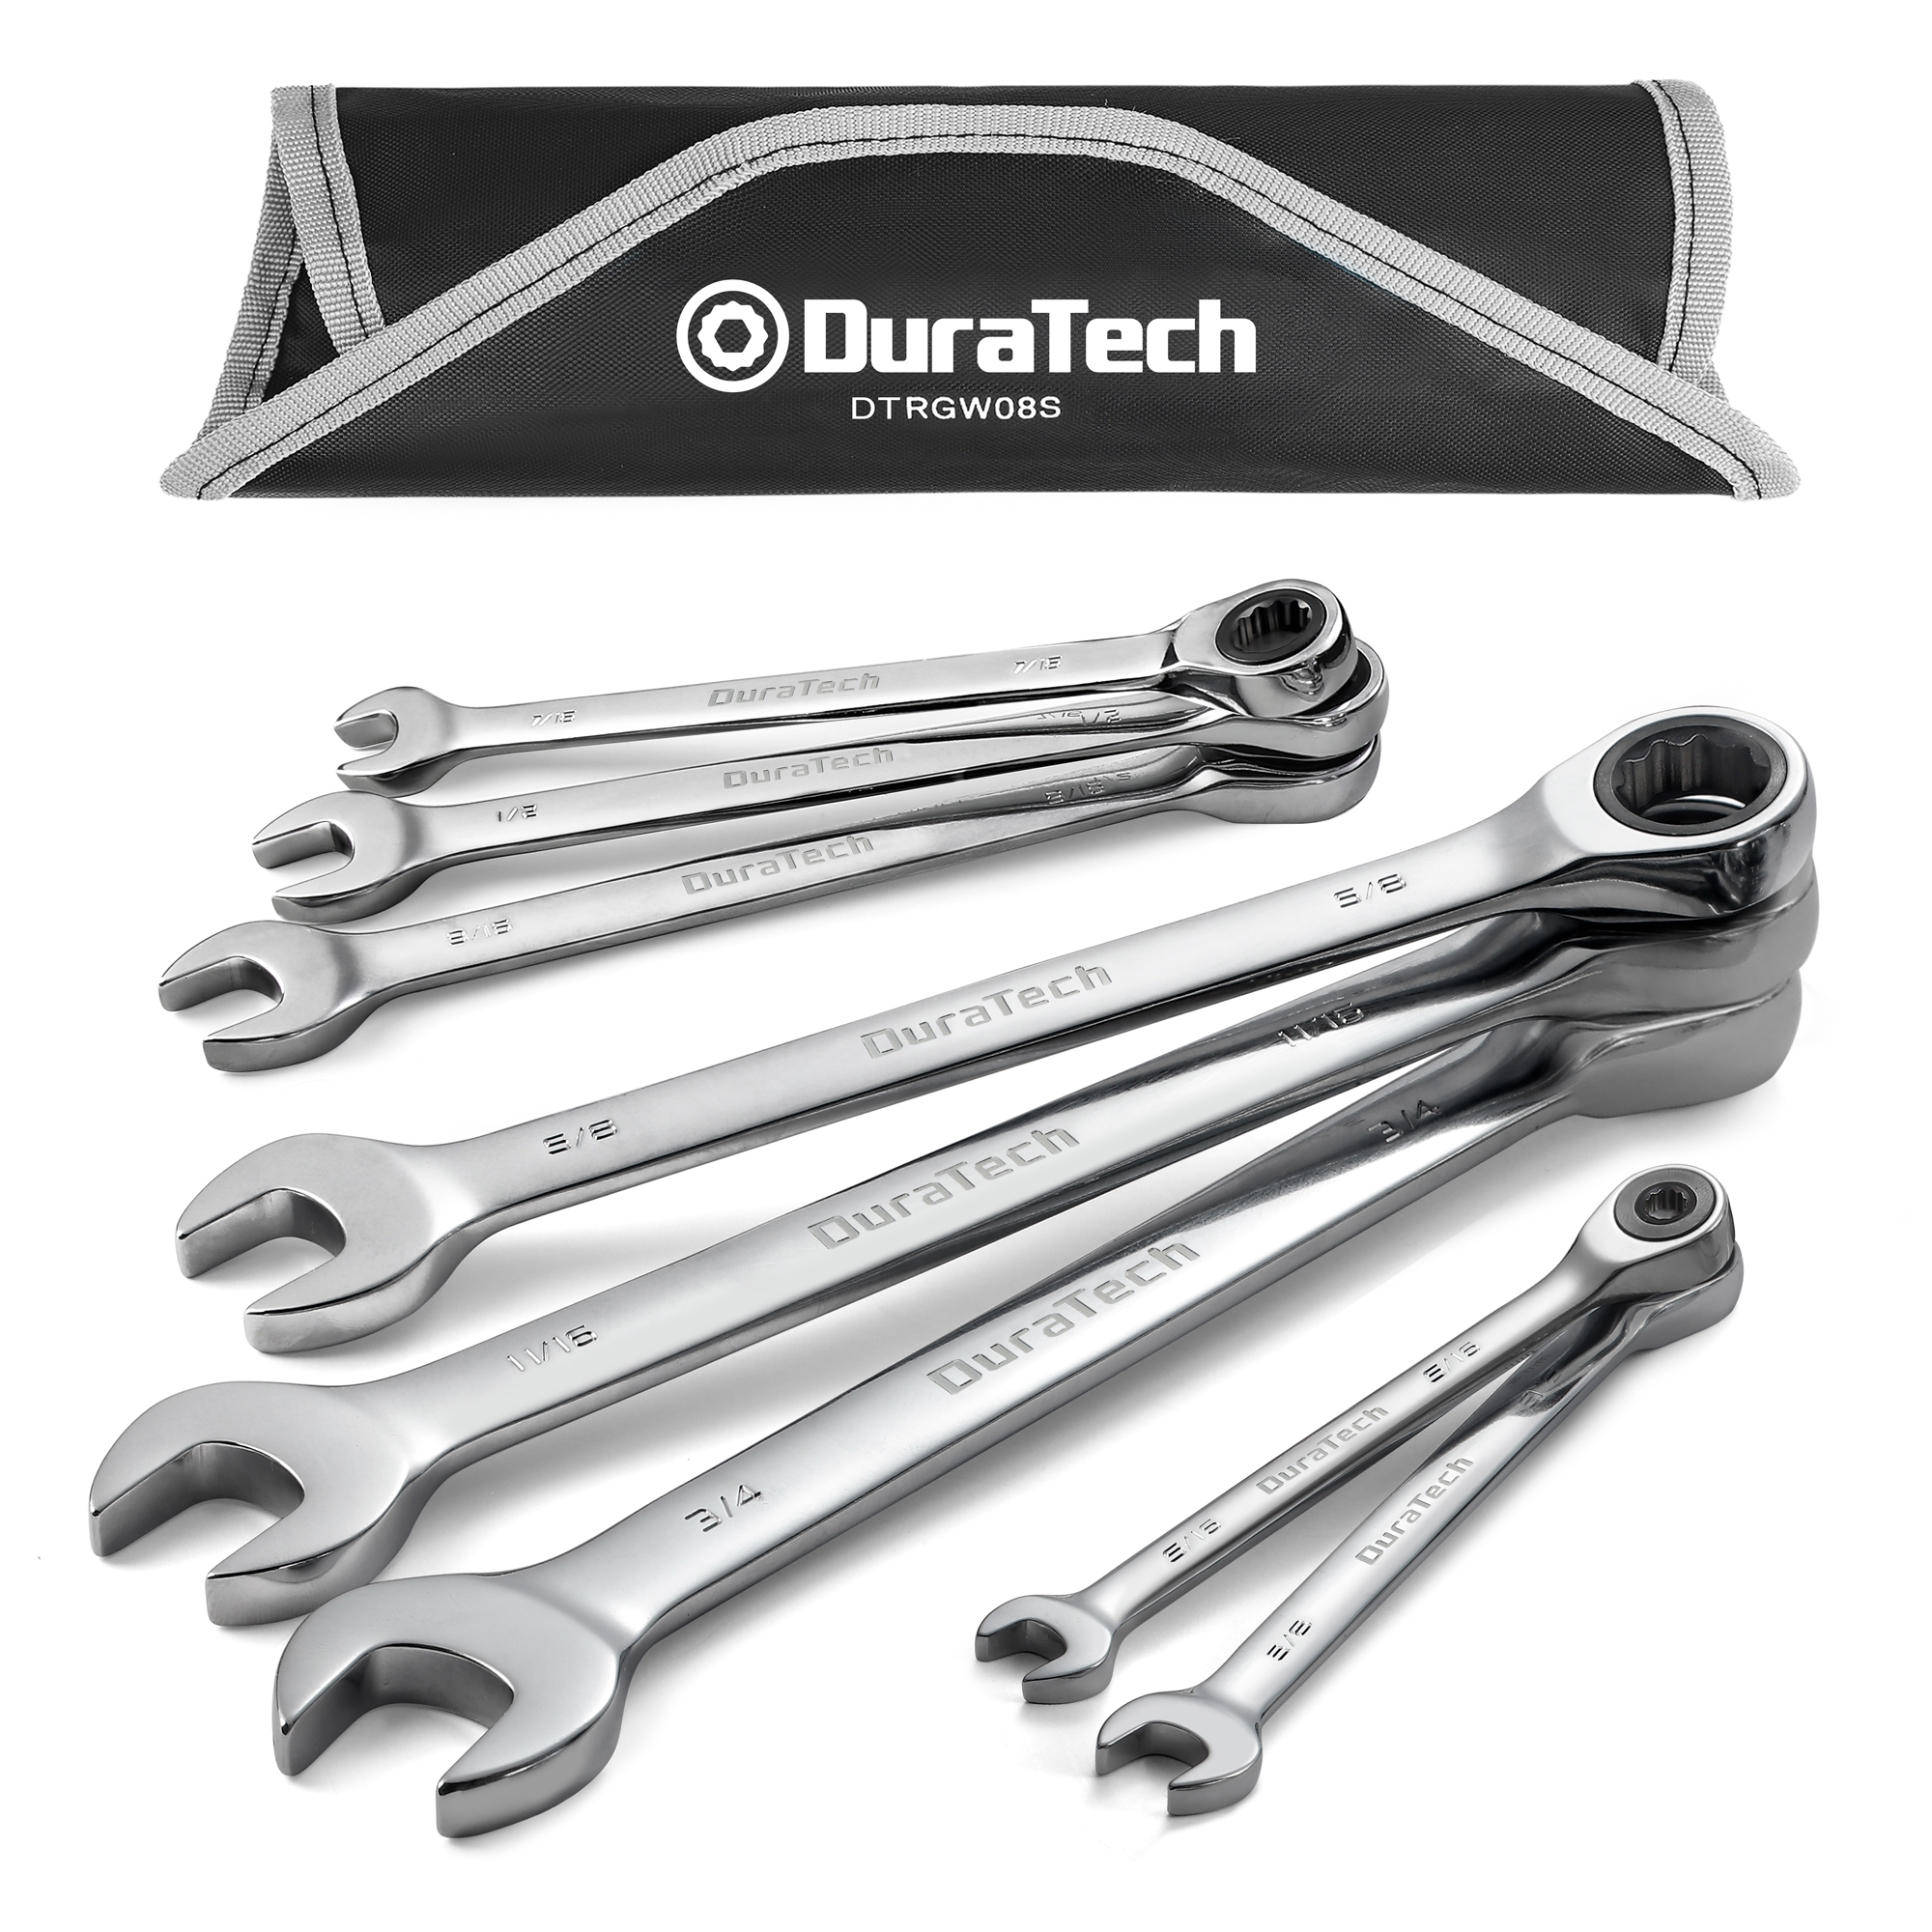 Ratcheting Combination Wrench Set, SAE